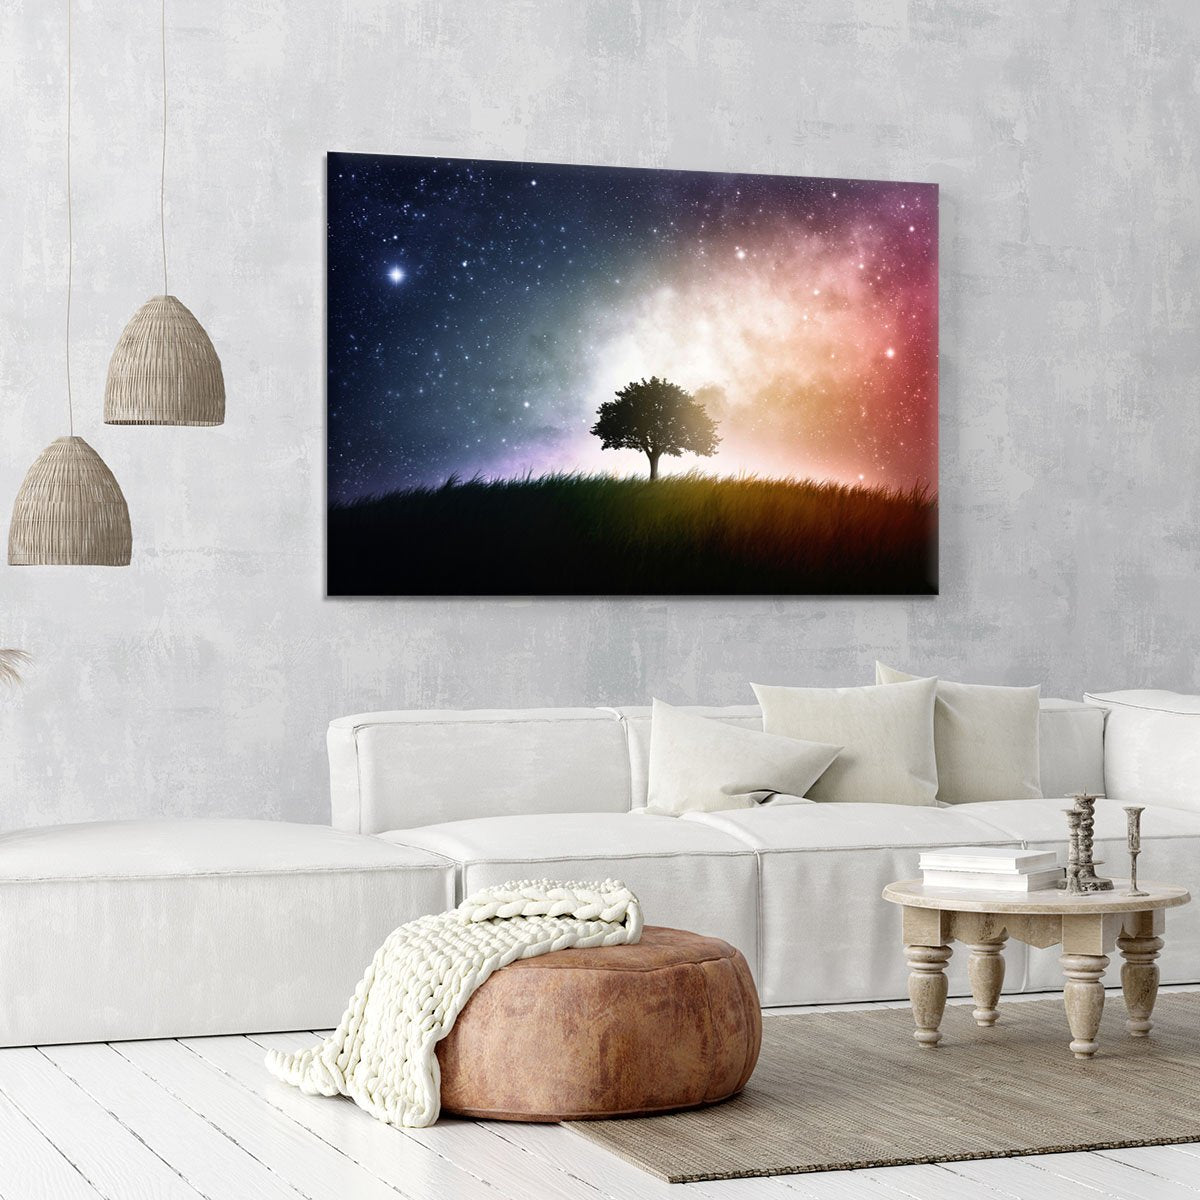 tree in a field with beautiful space background Canvas Print or Poster